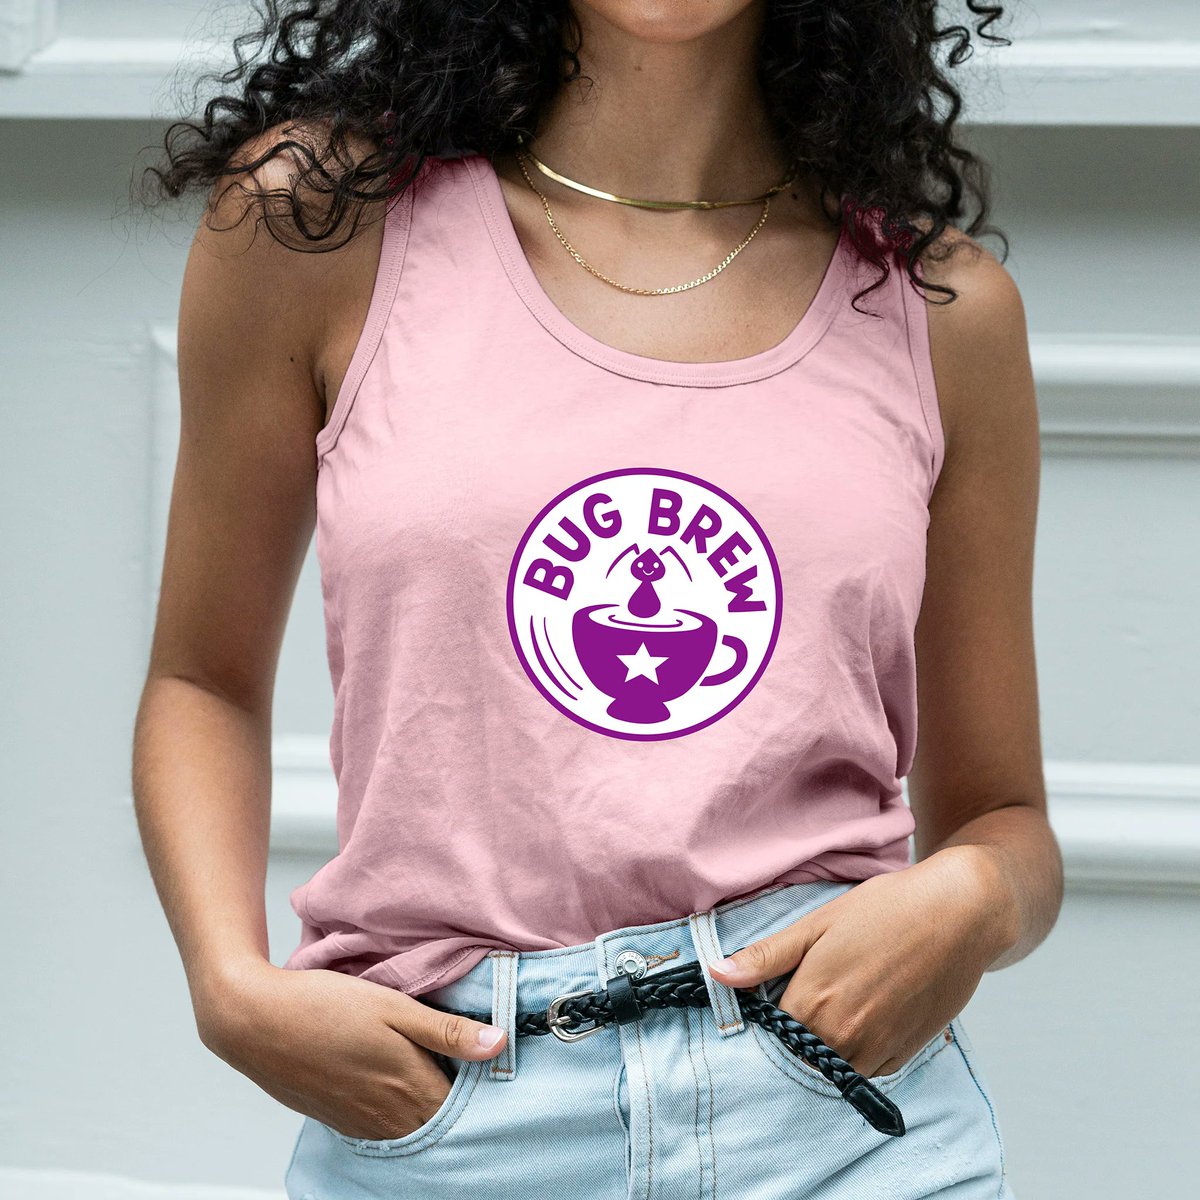 just delivered!! 🚚📦 @discosolaris Bug Brew Women's Tank (macaroon) 🪐 ps - 15% OFF Disco Solaris products through tonight, 11:59pm pdt 👀 shorturl.at/bqIXY